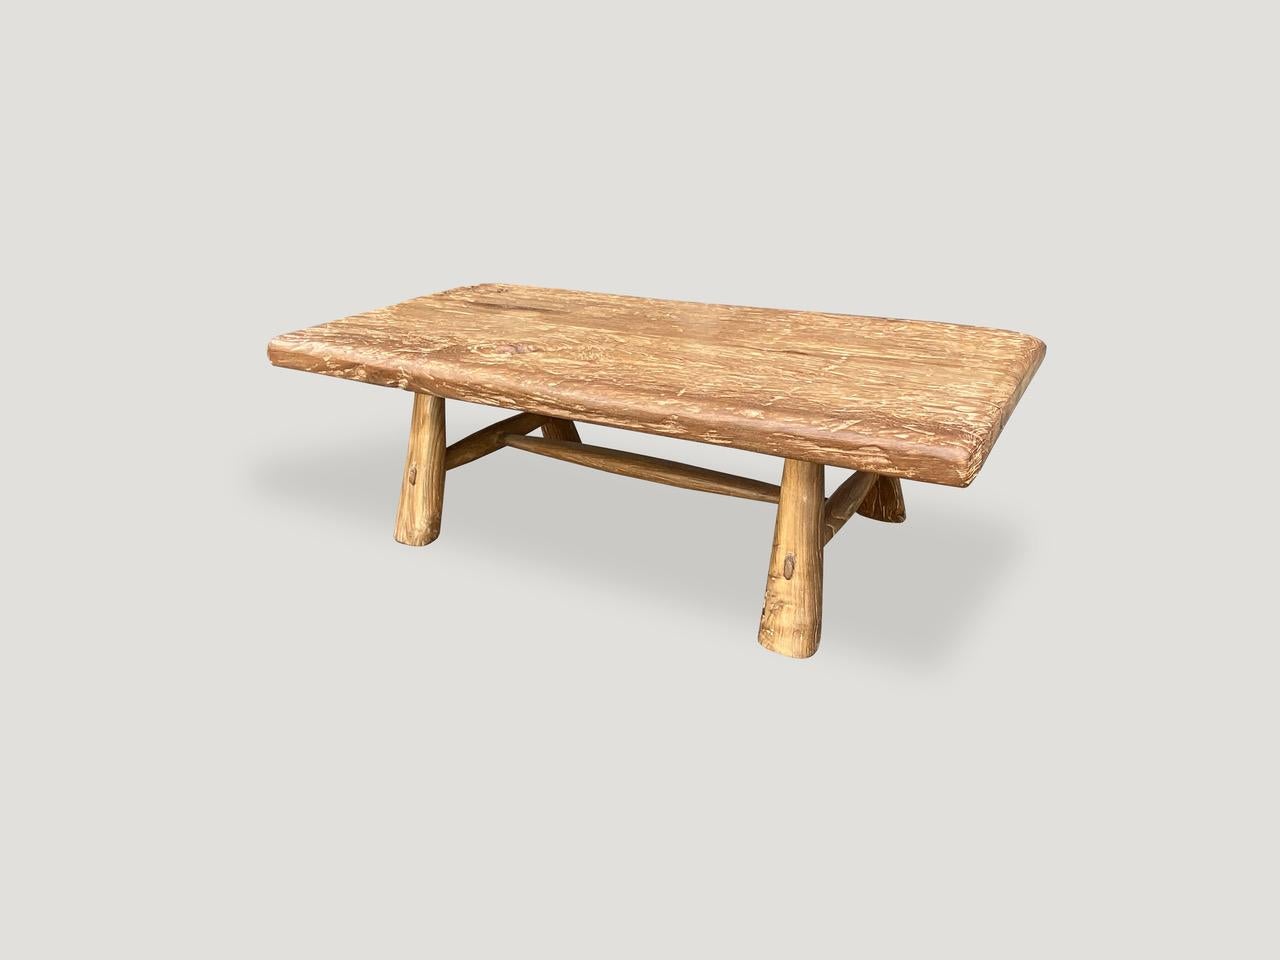 Introducing the Mid Century Couture Collection new to 2021. Furniture constructed by hand from start to finish. Two slabs of aged teak wood taken from my finest collection with beautiful patina and stunning grain, are joined together. We added soft